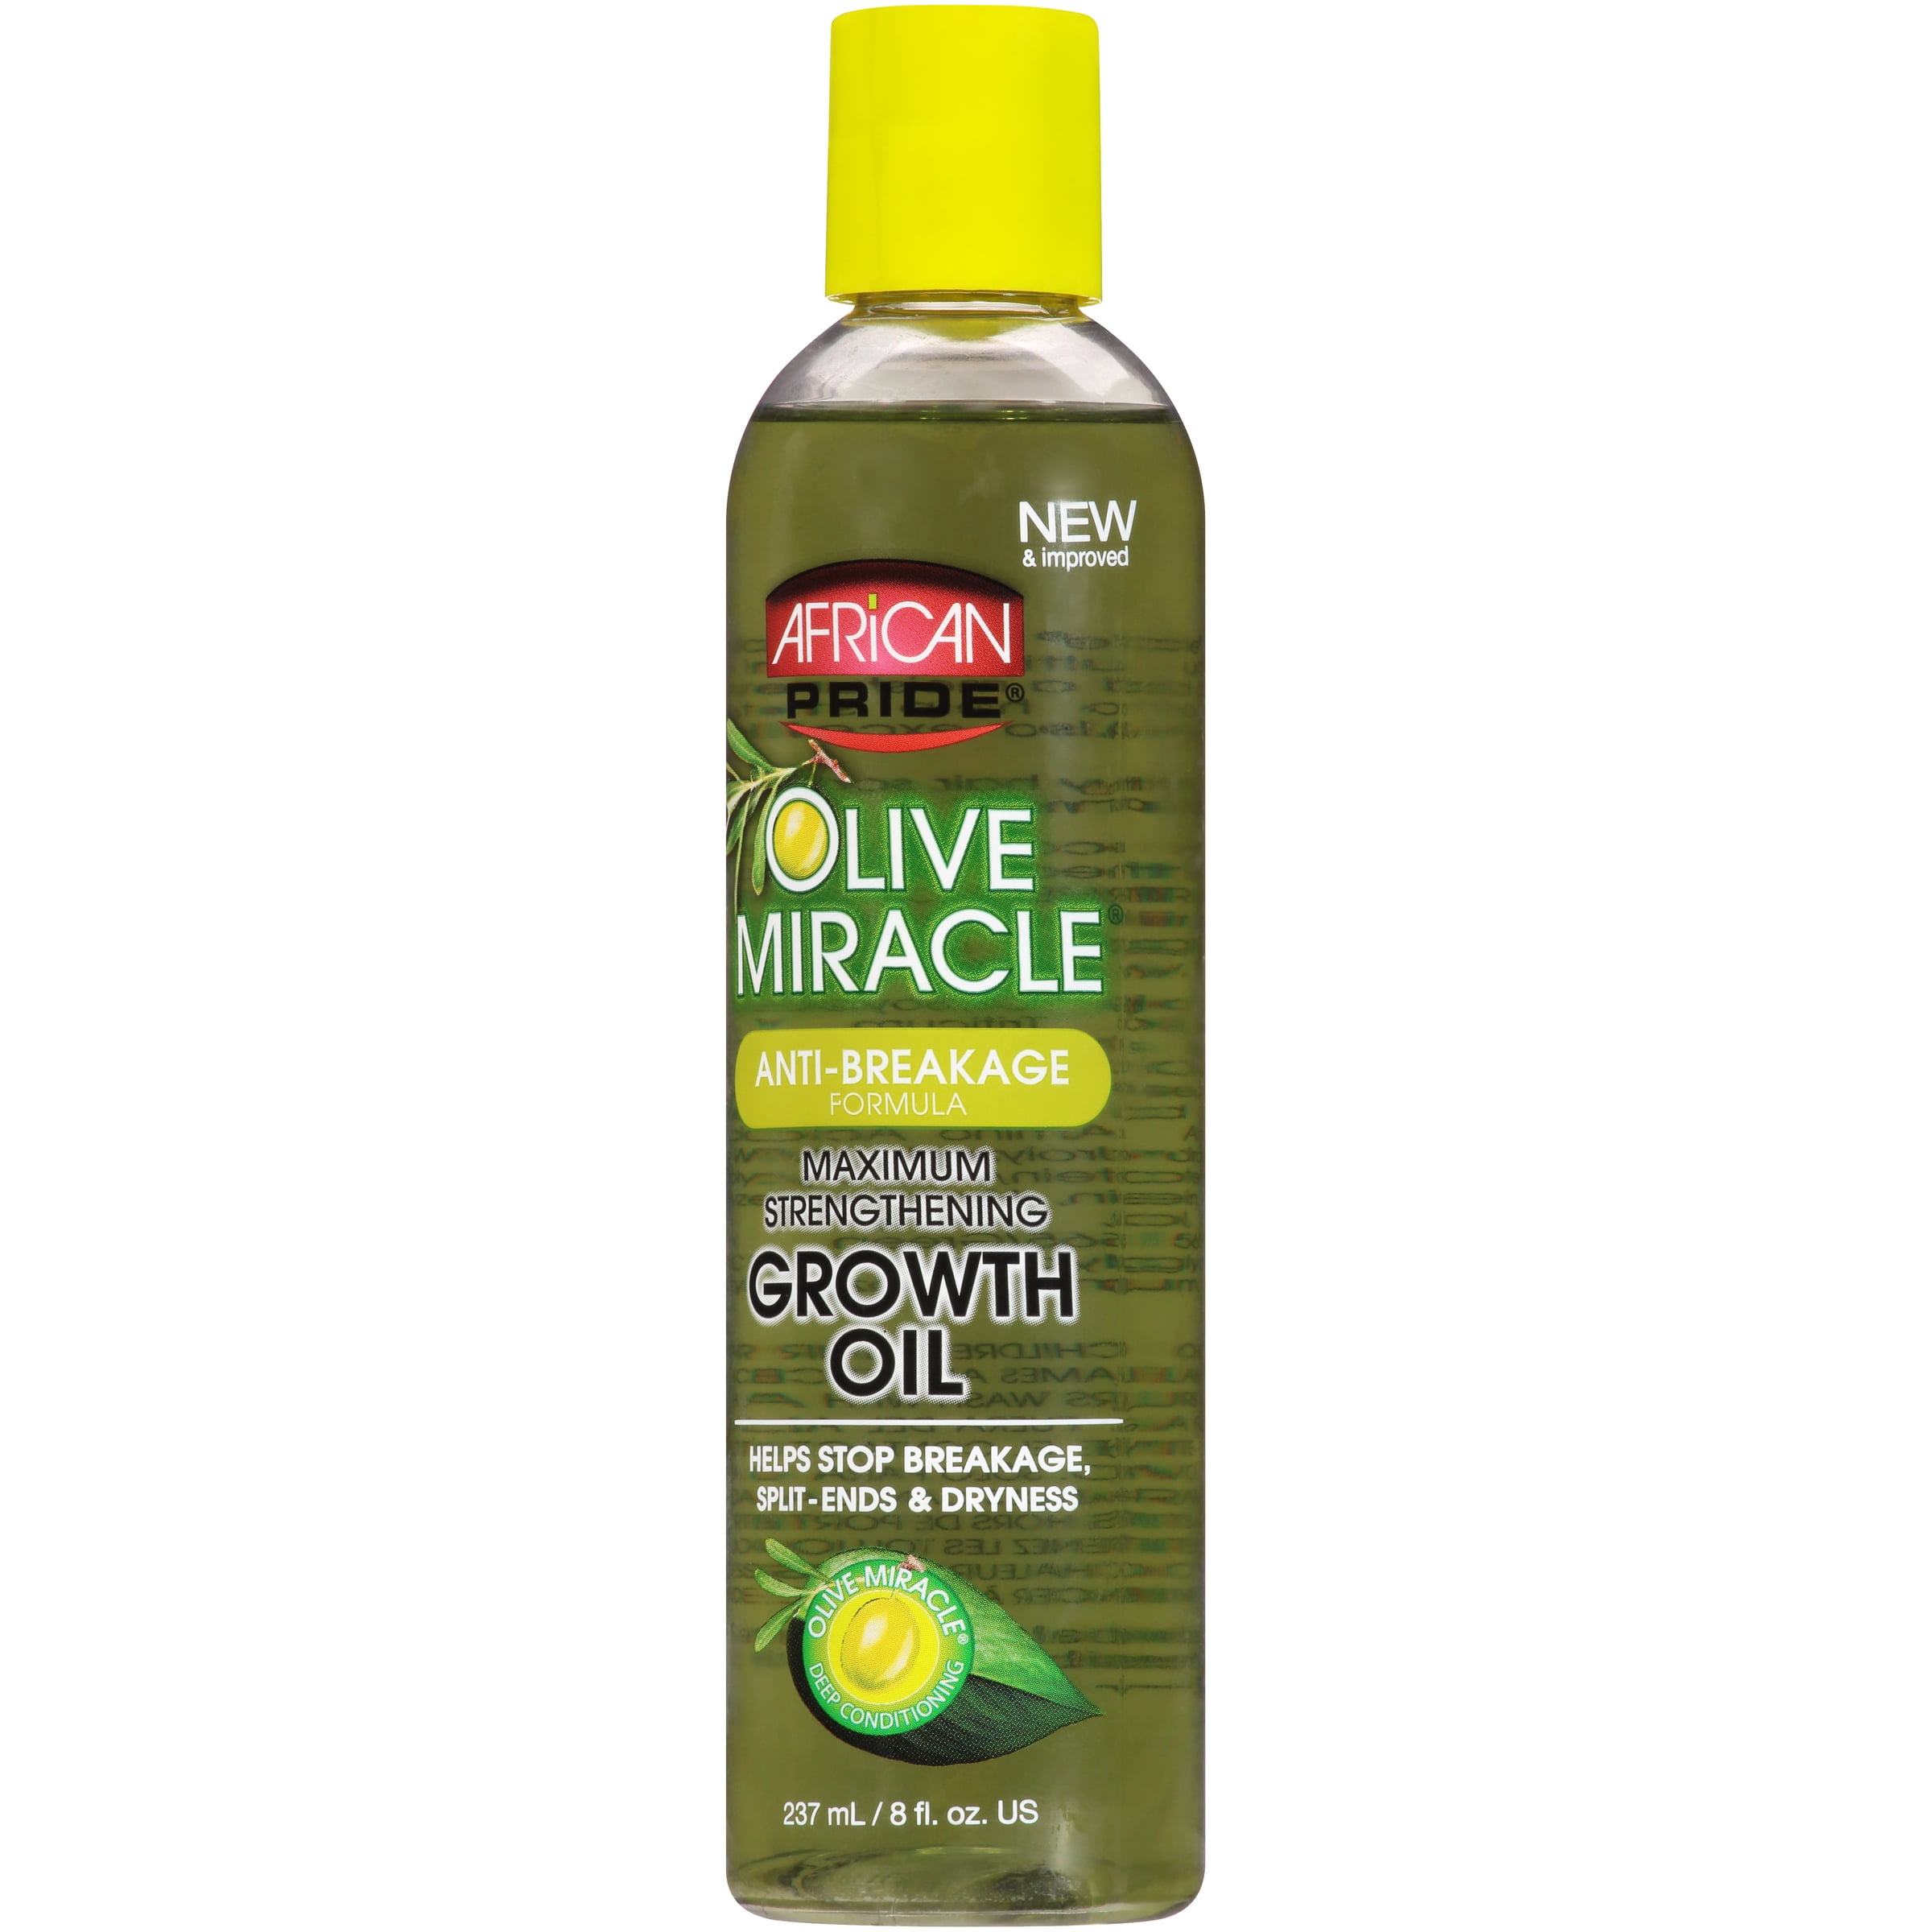 Olive Miracle. Olive Miracle Foam. Miracle growth. Growth Oil Africa как пользоваться.